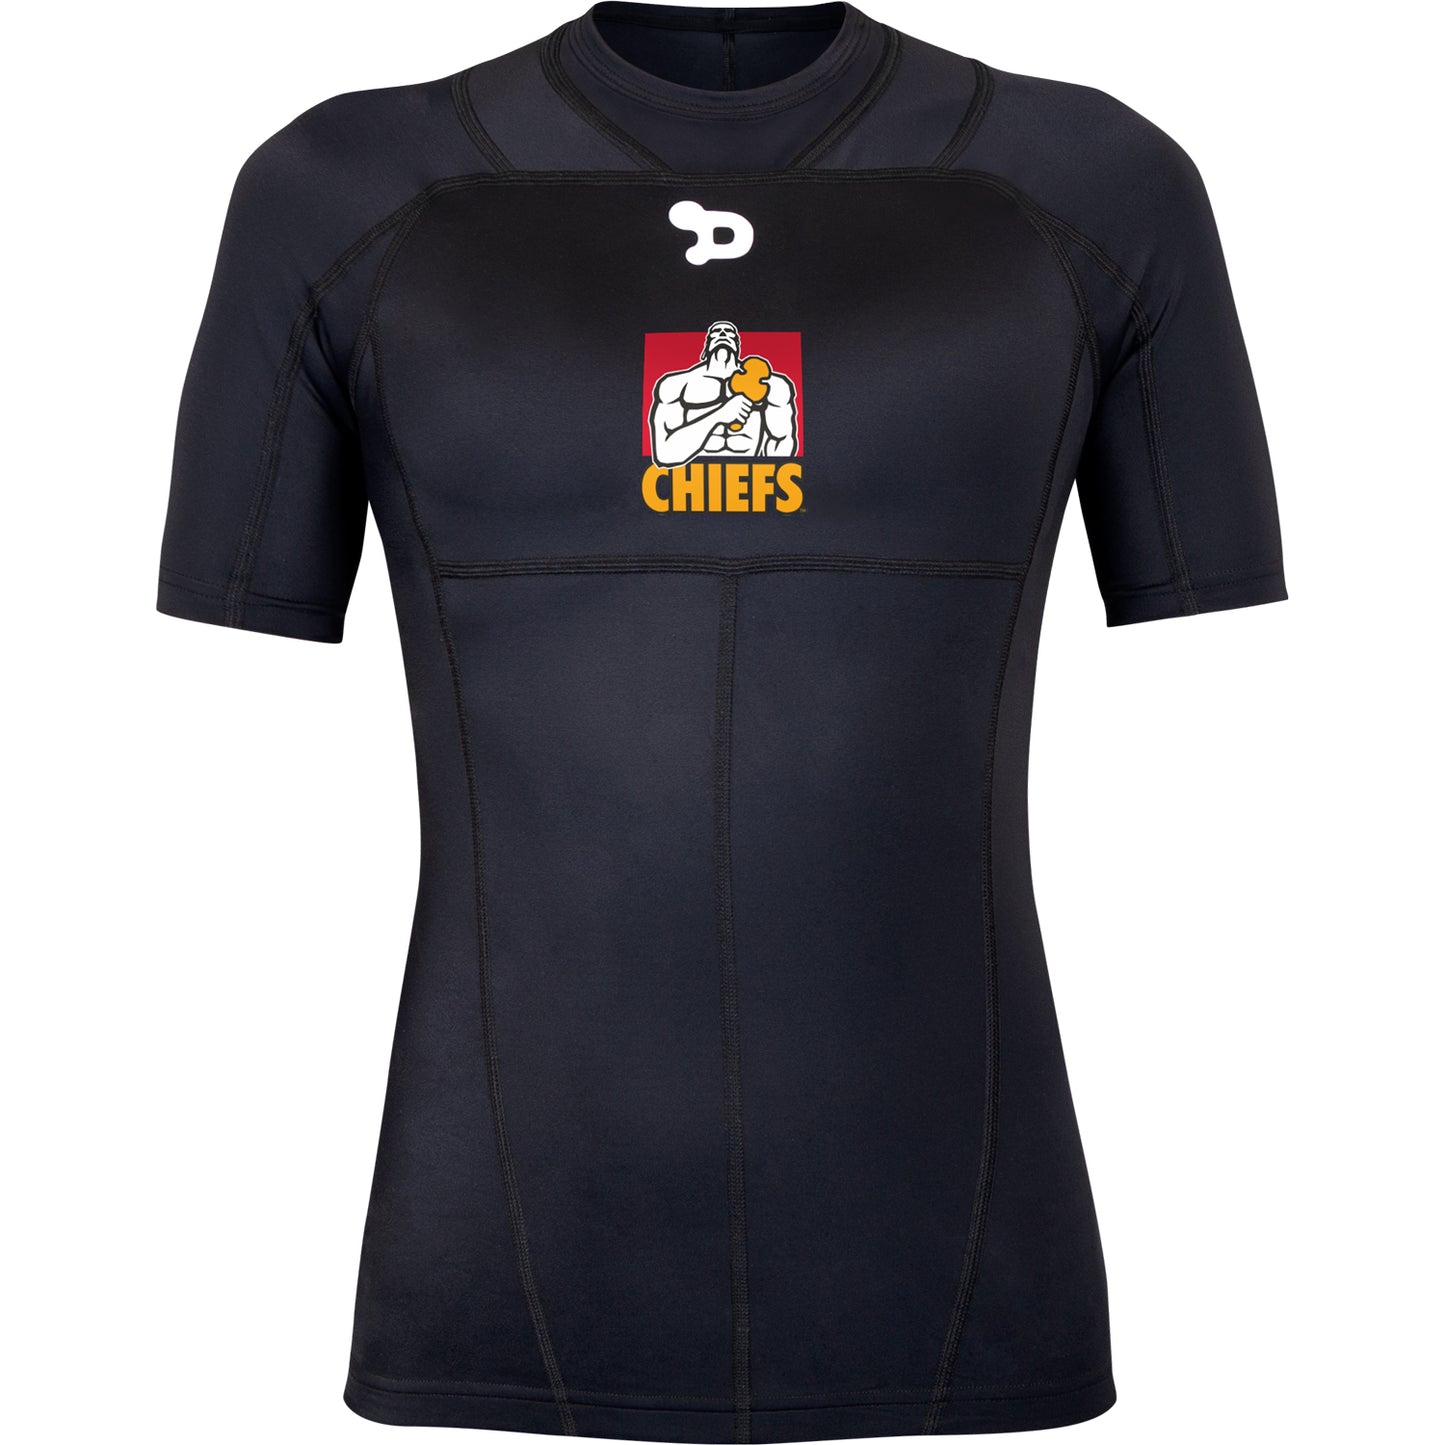 Chiefs Ladies Compression Top SS